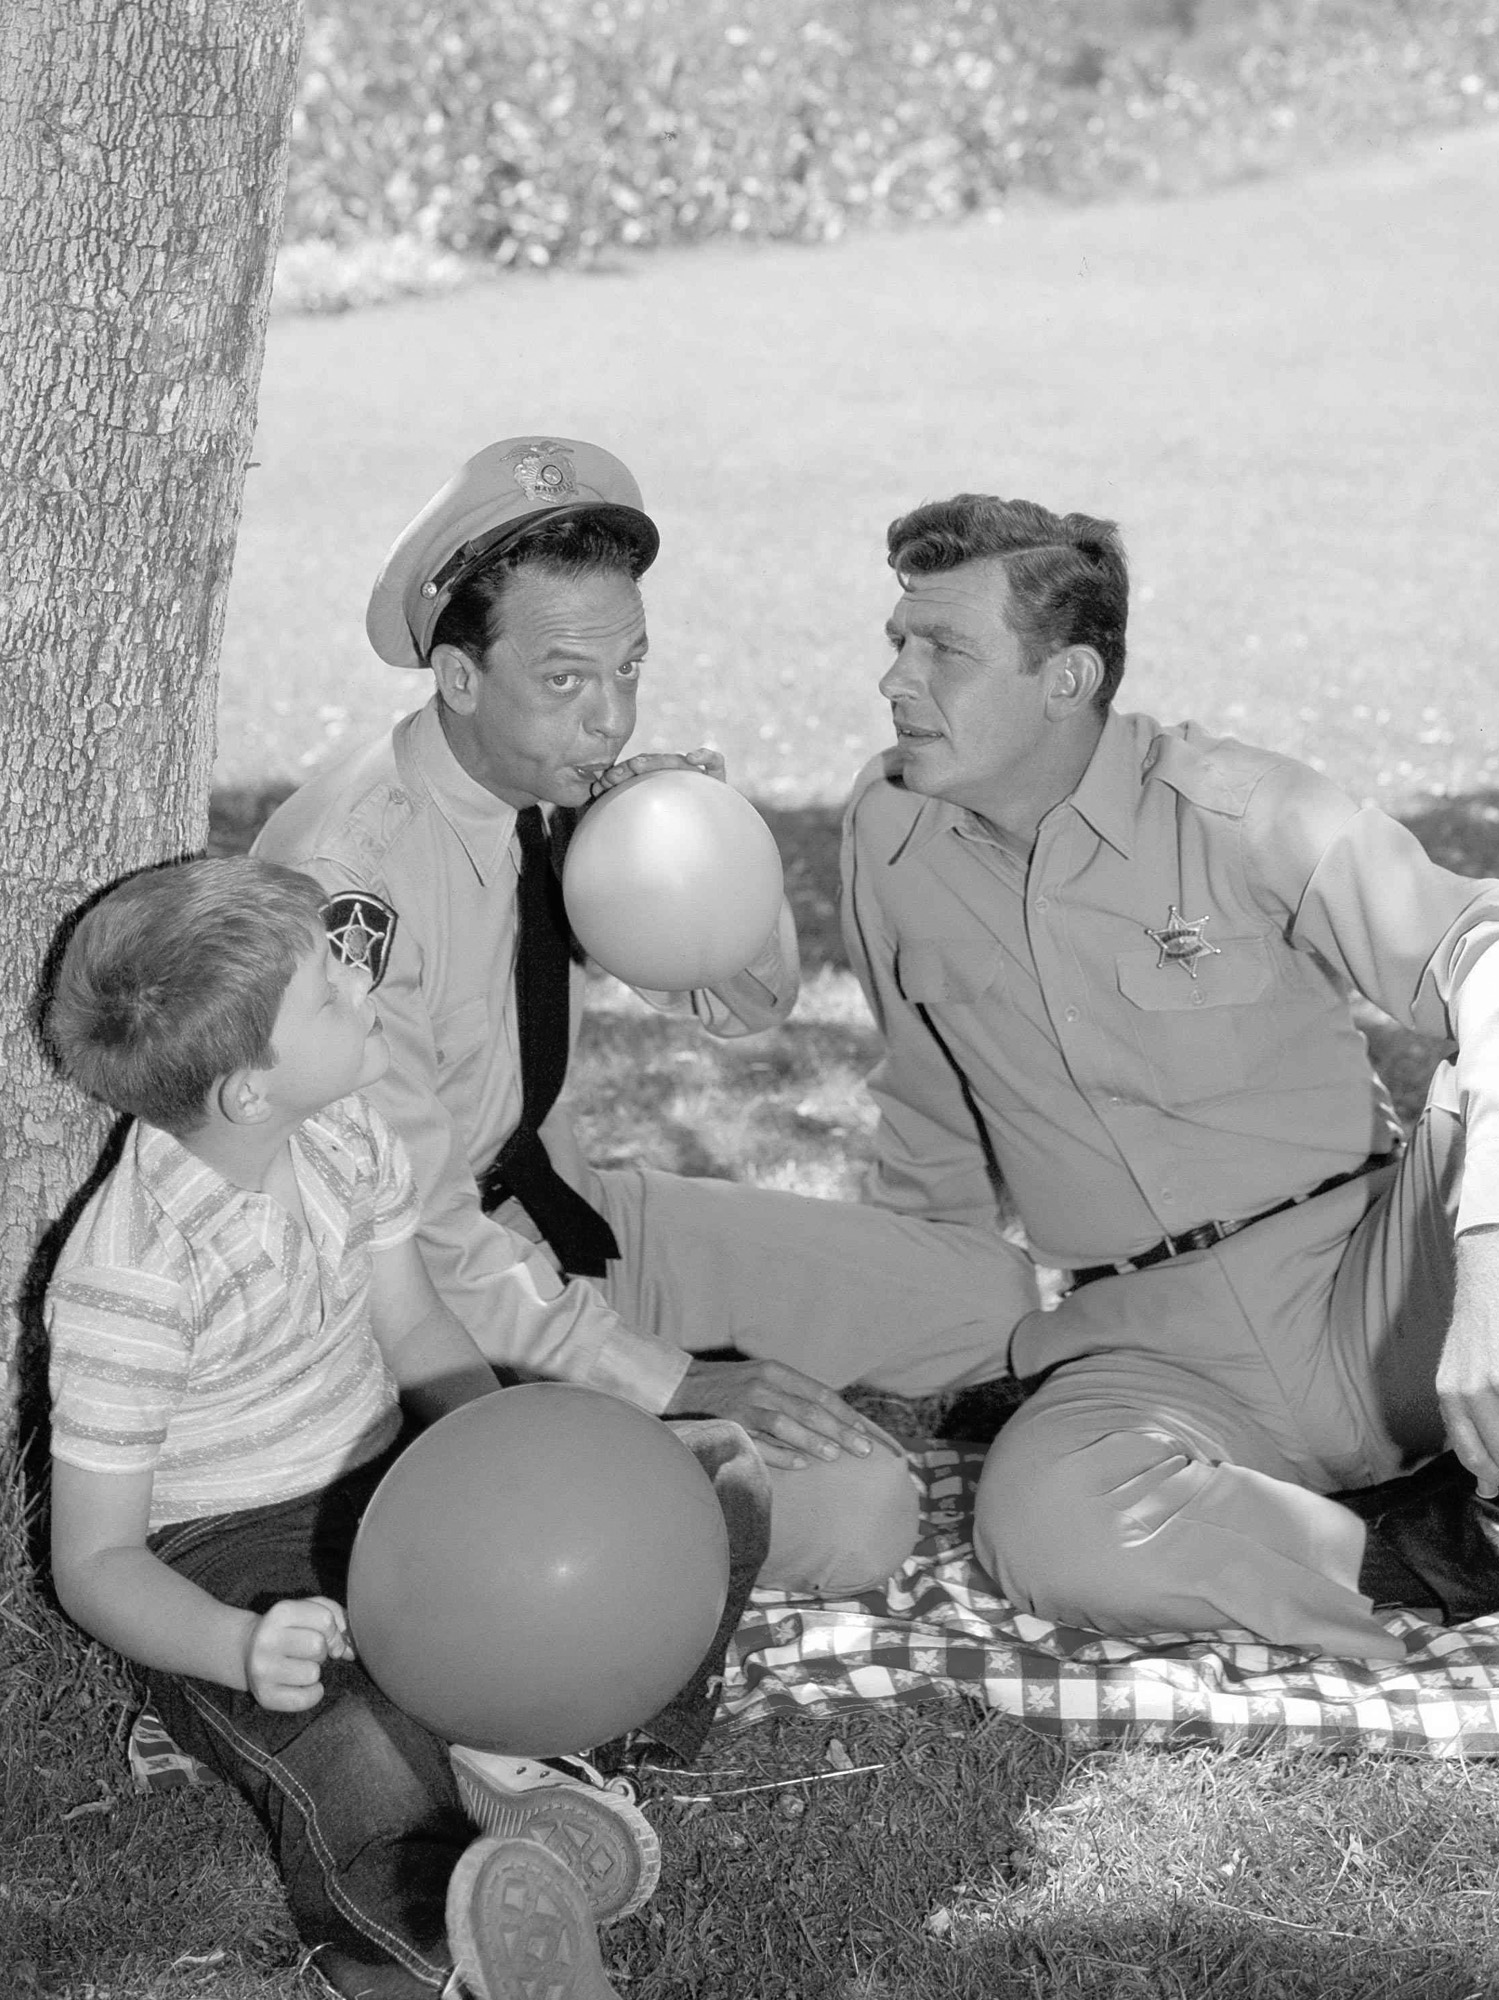 'The Andy Griffith Show' stars Ron Howard, Don Knotts, and Andy Griffith